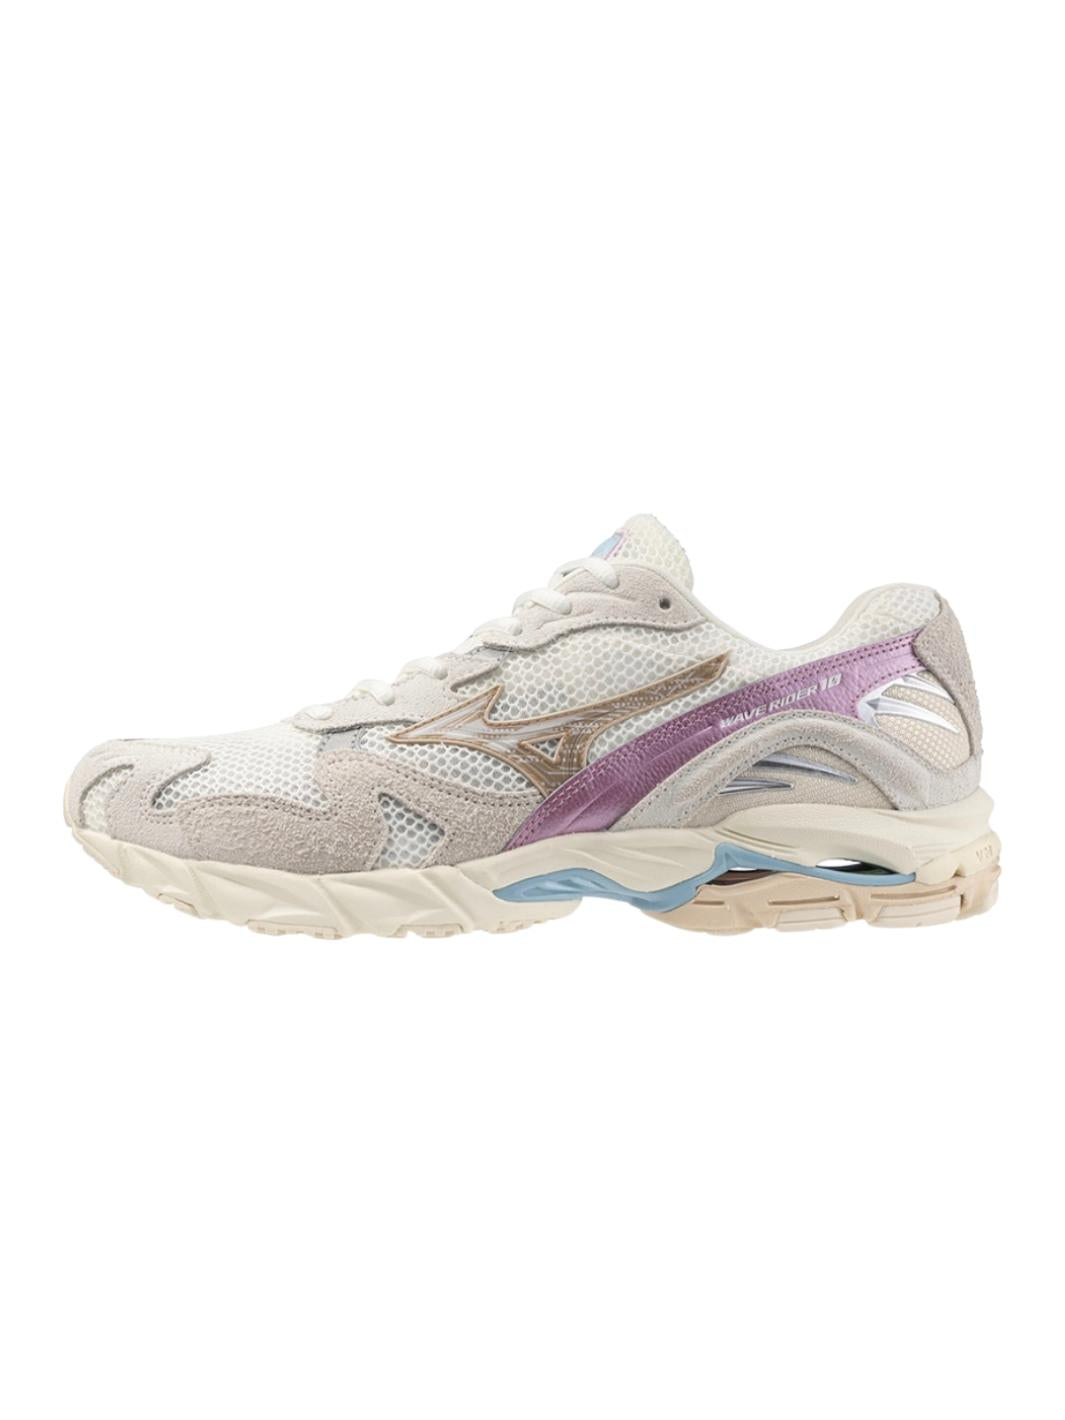 Mizuno Shoes Sneakers | Wave Rider 10 Sand/Snow